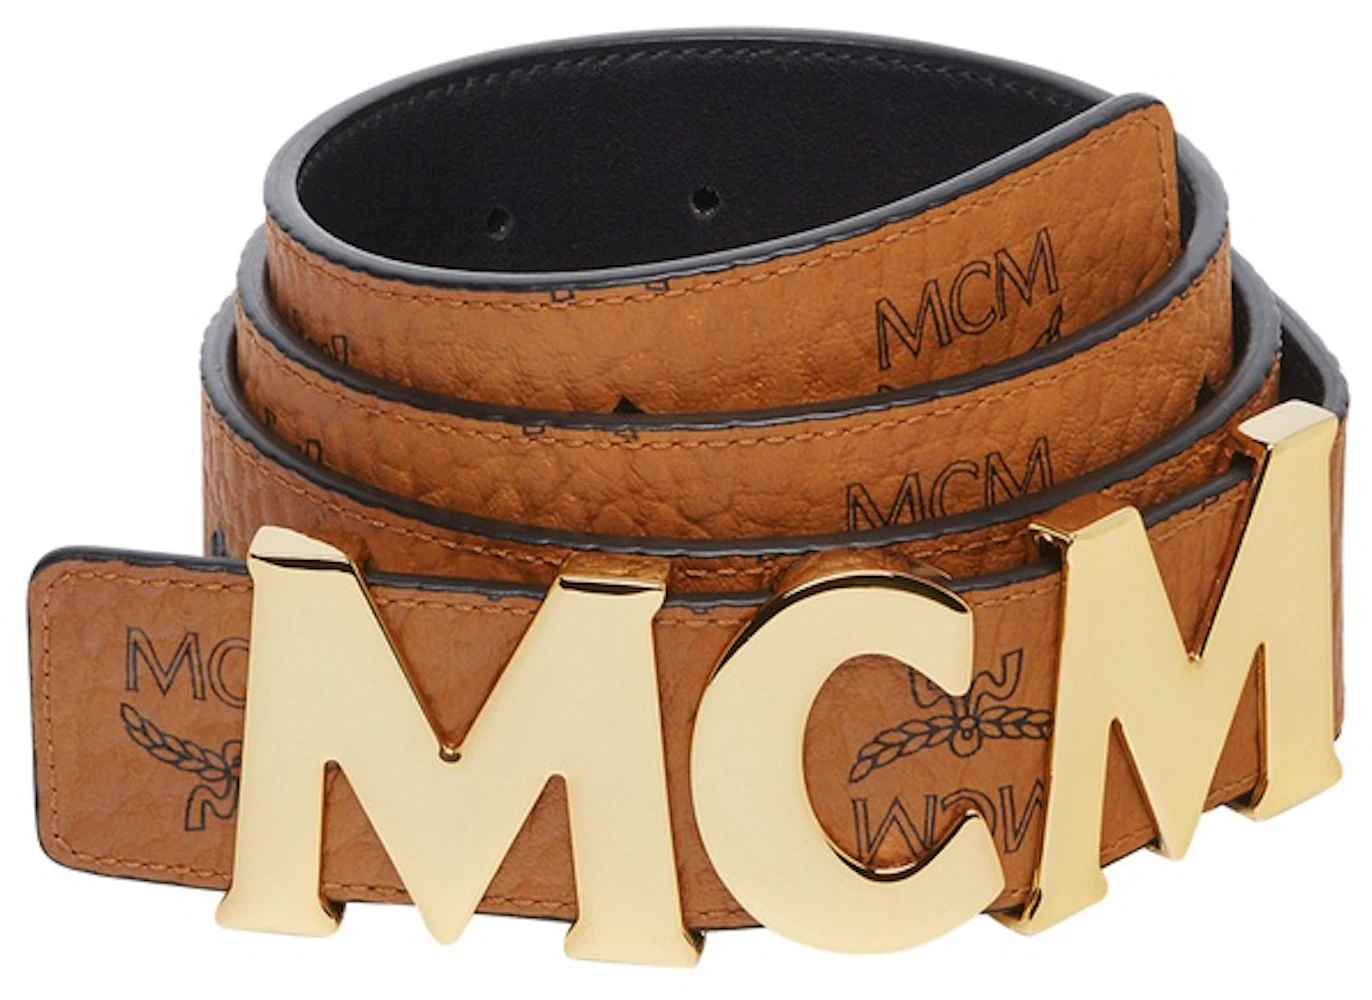 MCM M Reversible Belt Visetos Cognac/Red in Coated Canvas/Leather with  Silver-tone - US